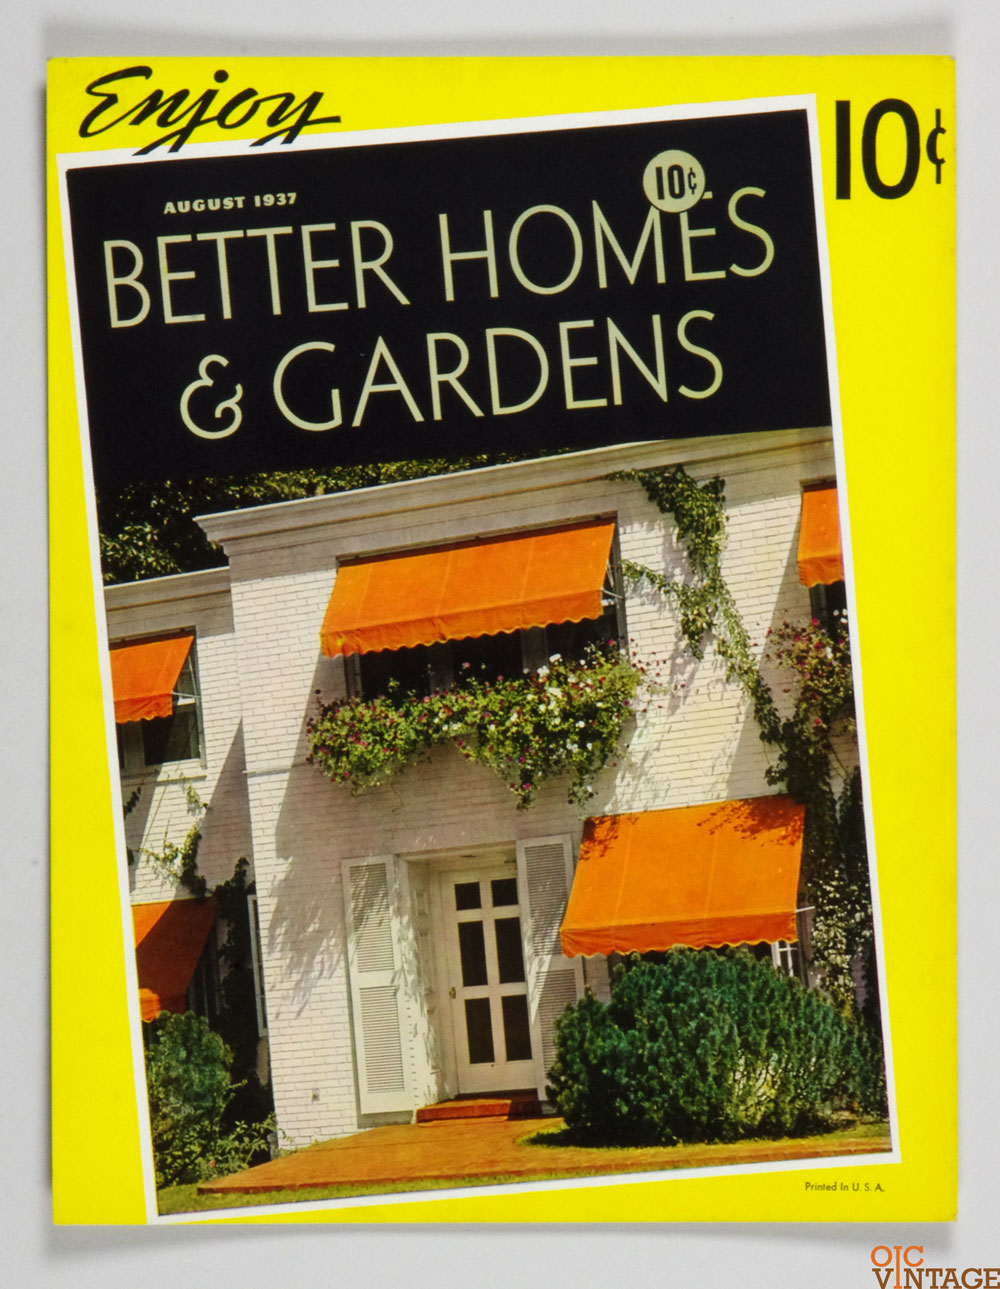 Better Homes & Gardens Cardboard Display  1937 August  Magazine Cover